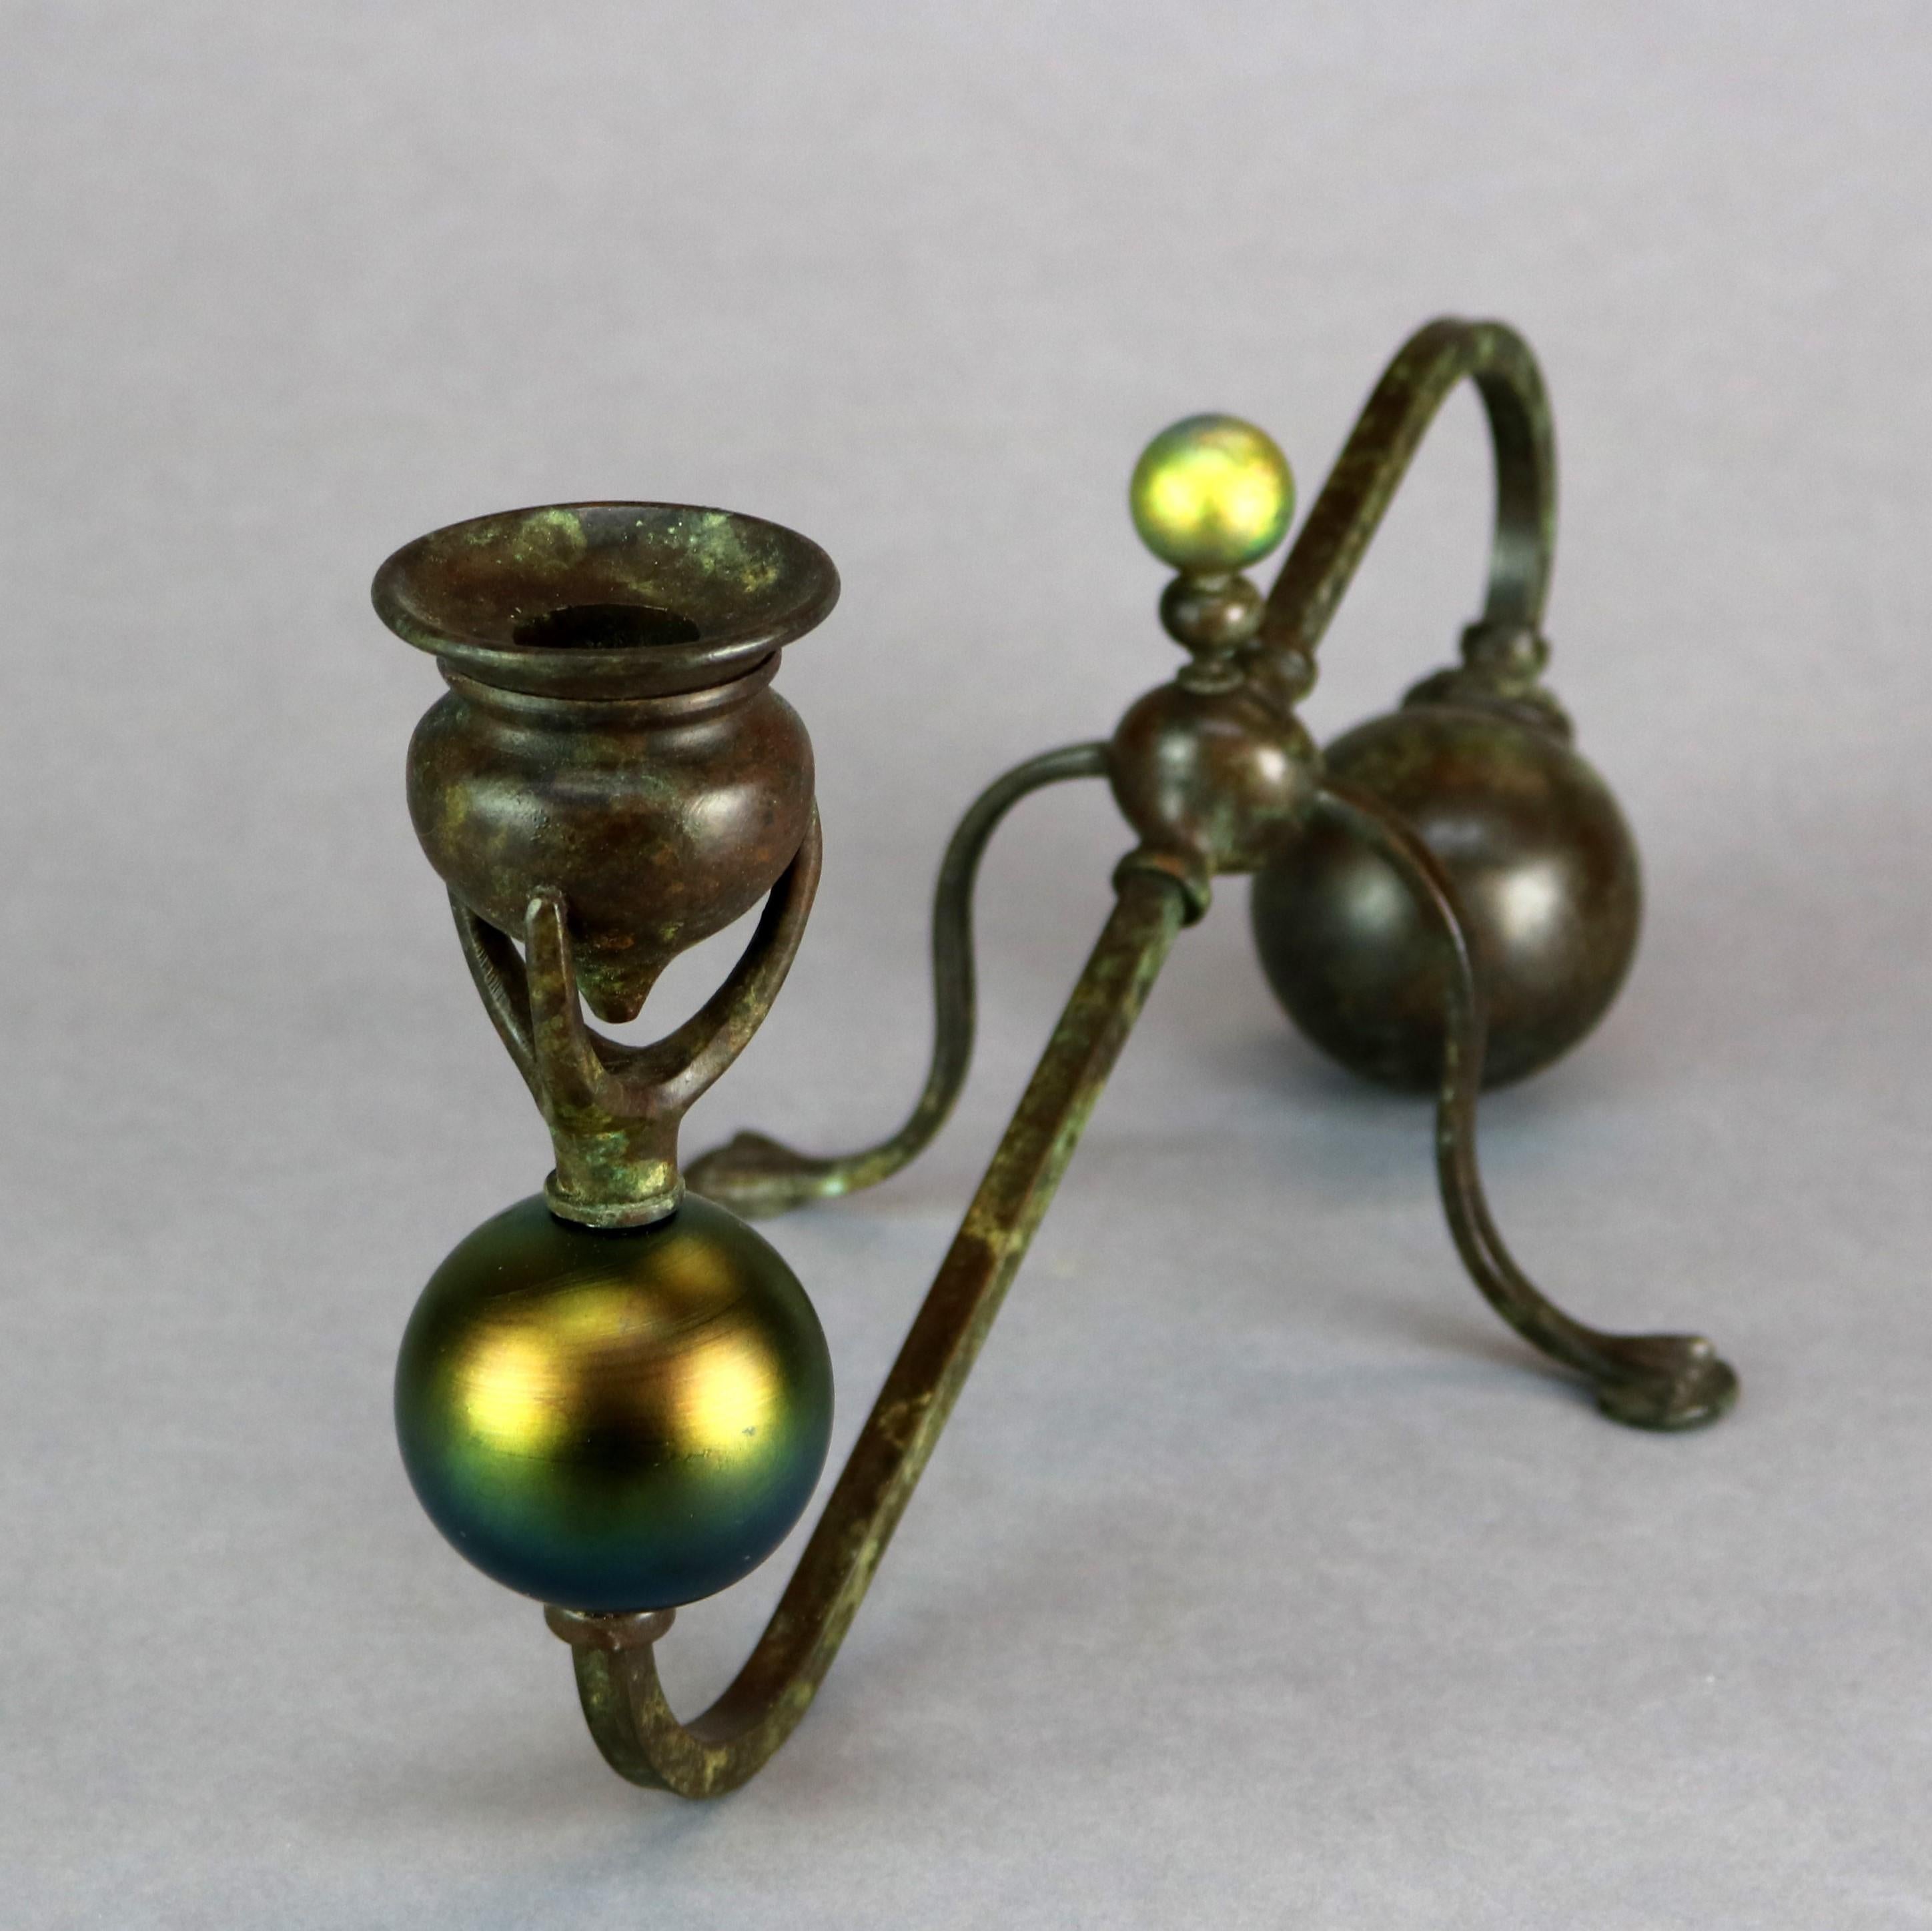 An antique Art Nouveau root candelabra after Tiffany Studios offers bronze frame in organic stylized wave, root or branch form with flanking globes, one bronze and the other art glass and terminating in three prongs cradling an urn form candle